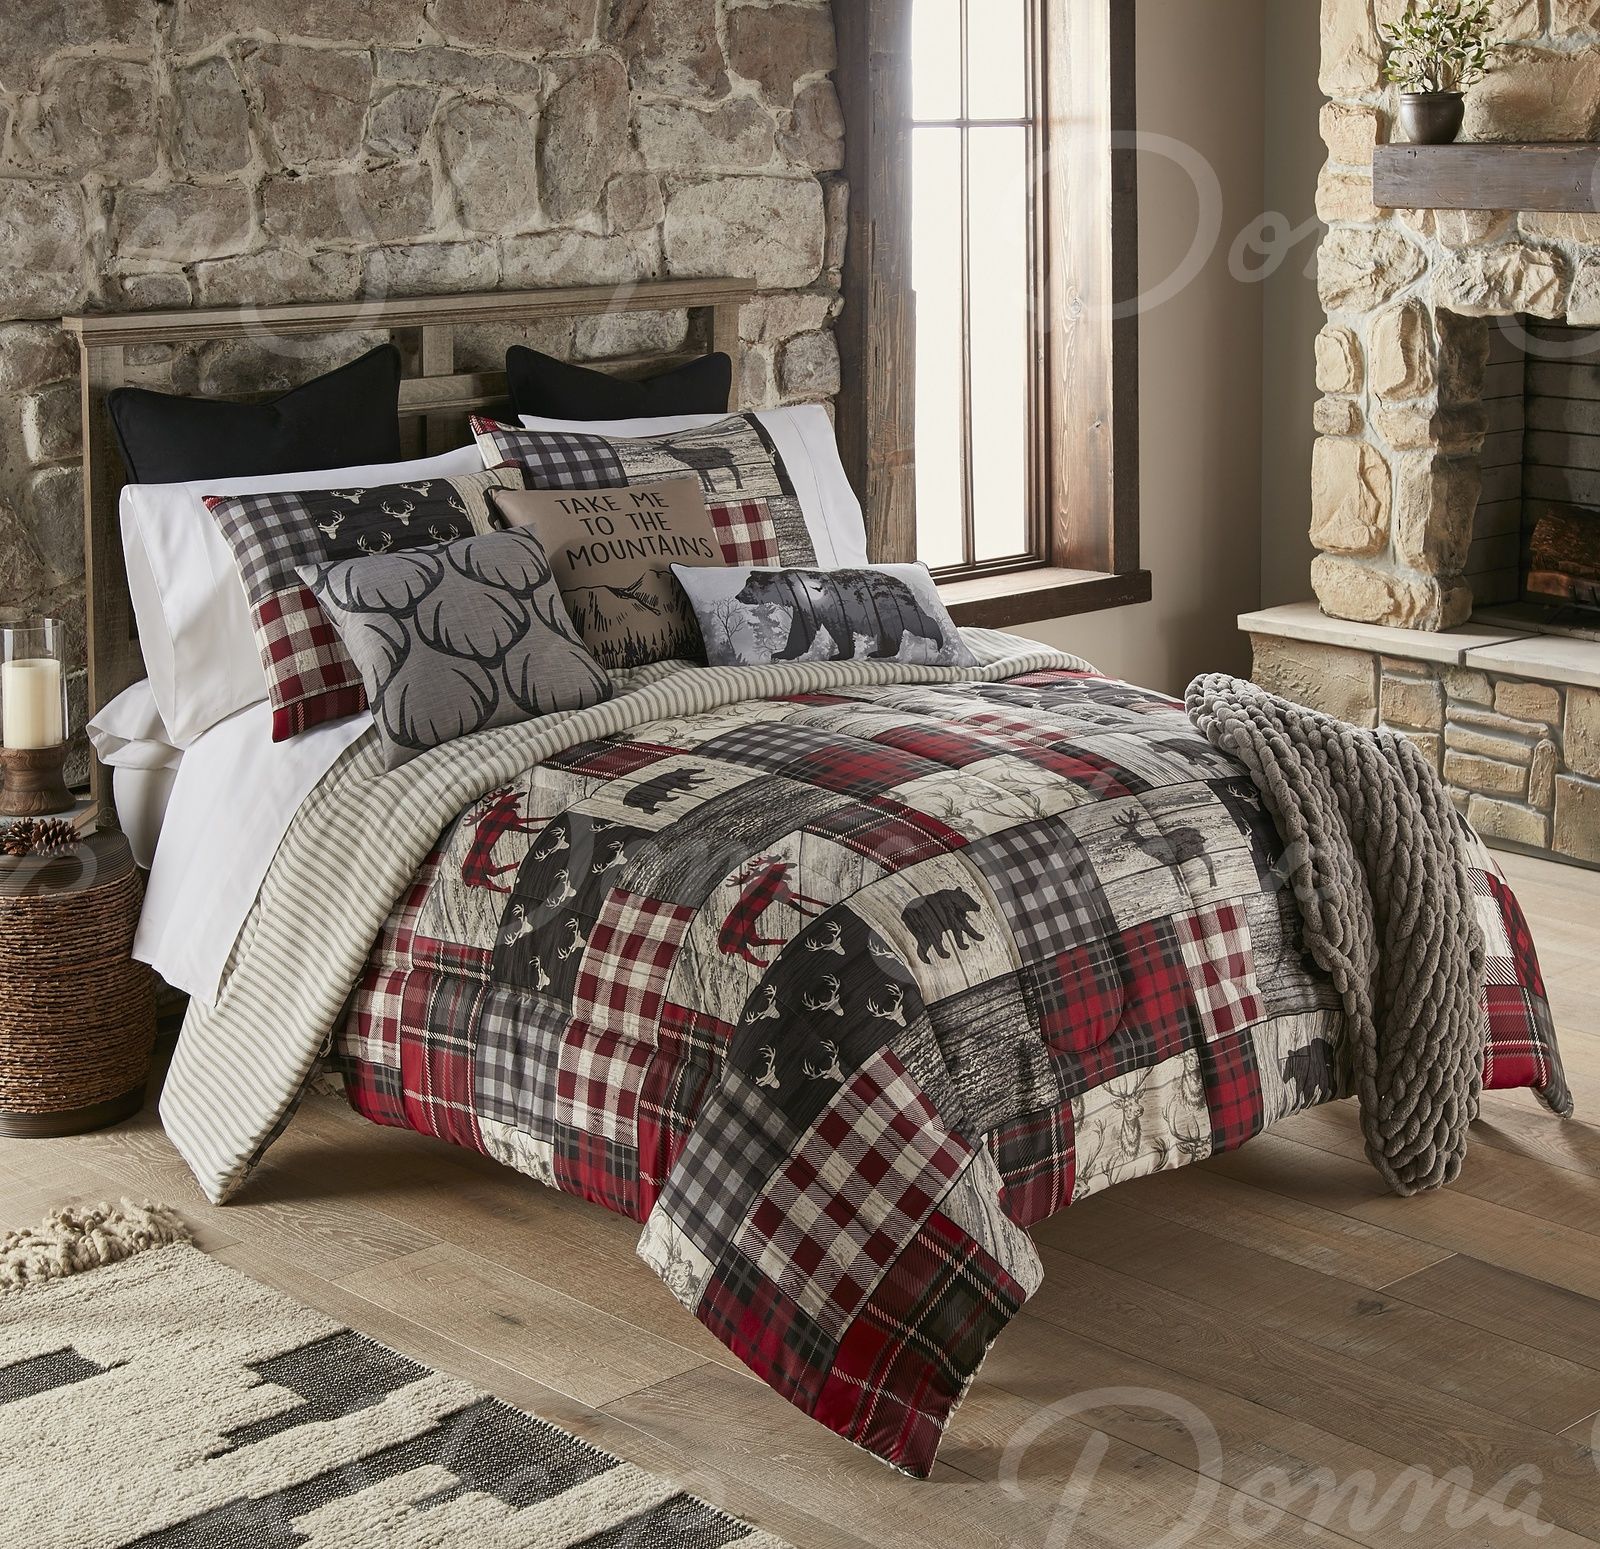 Cedar Lodge 3pc Comforter Bedding Set from Your Lifestyle by Donna Sharp